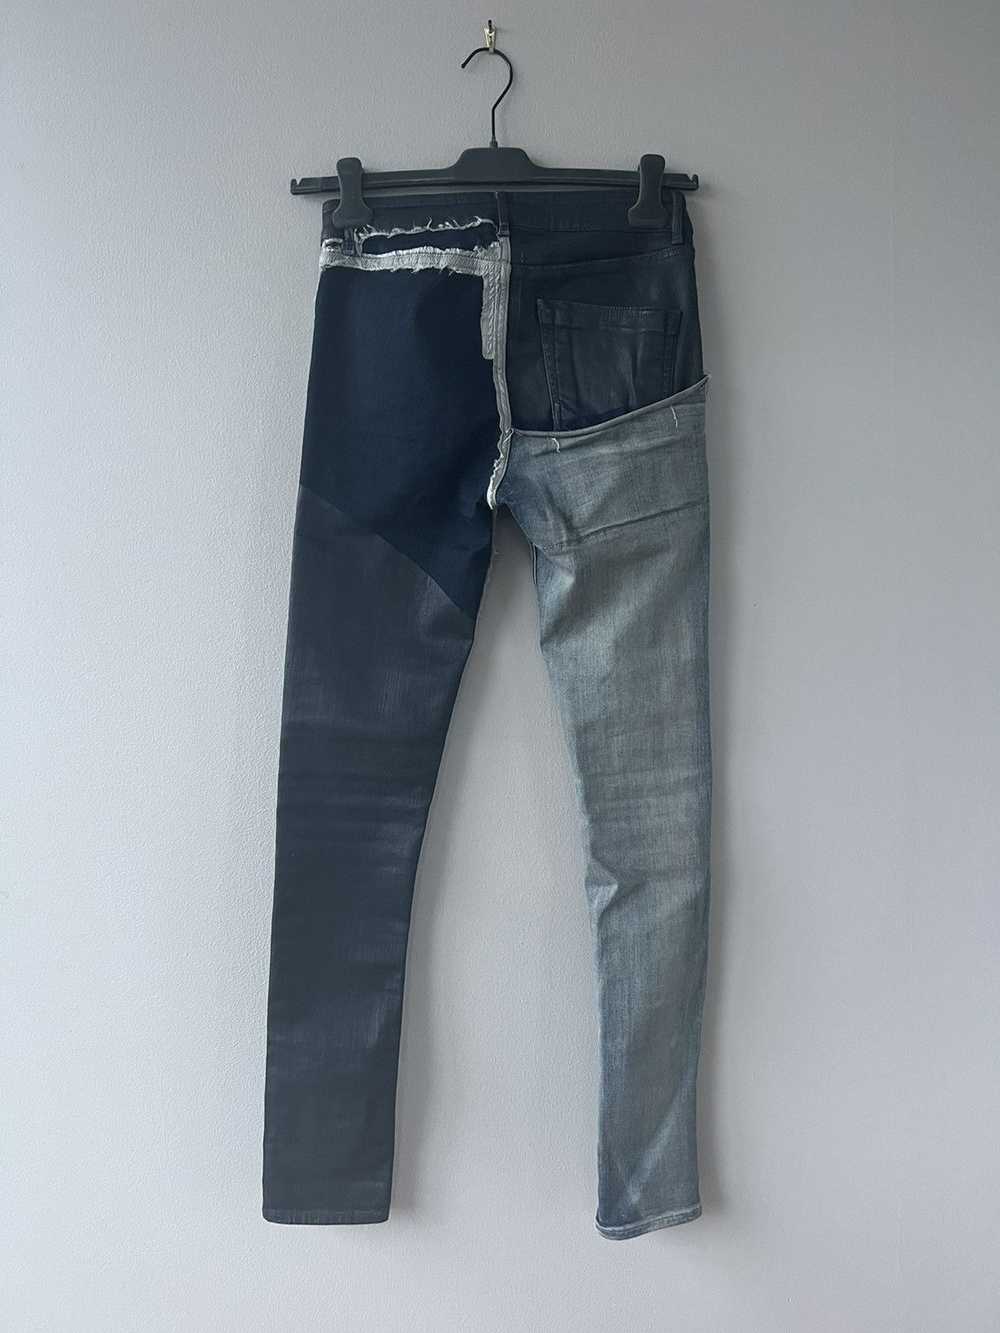 Rick Owens SS19 BABEL Combo Tyrone Jeans - image 5